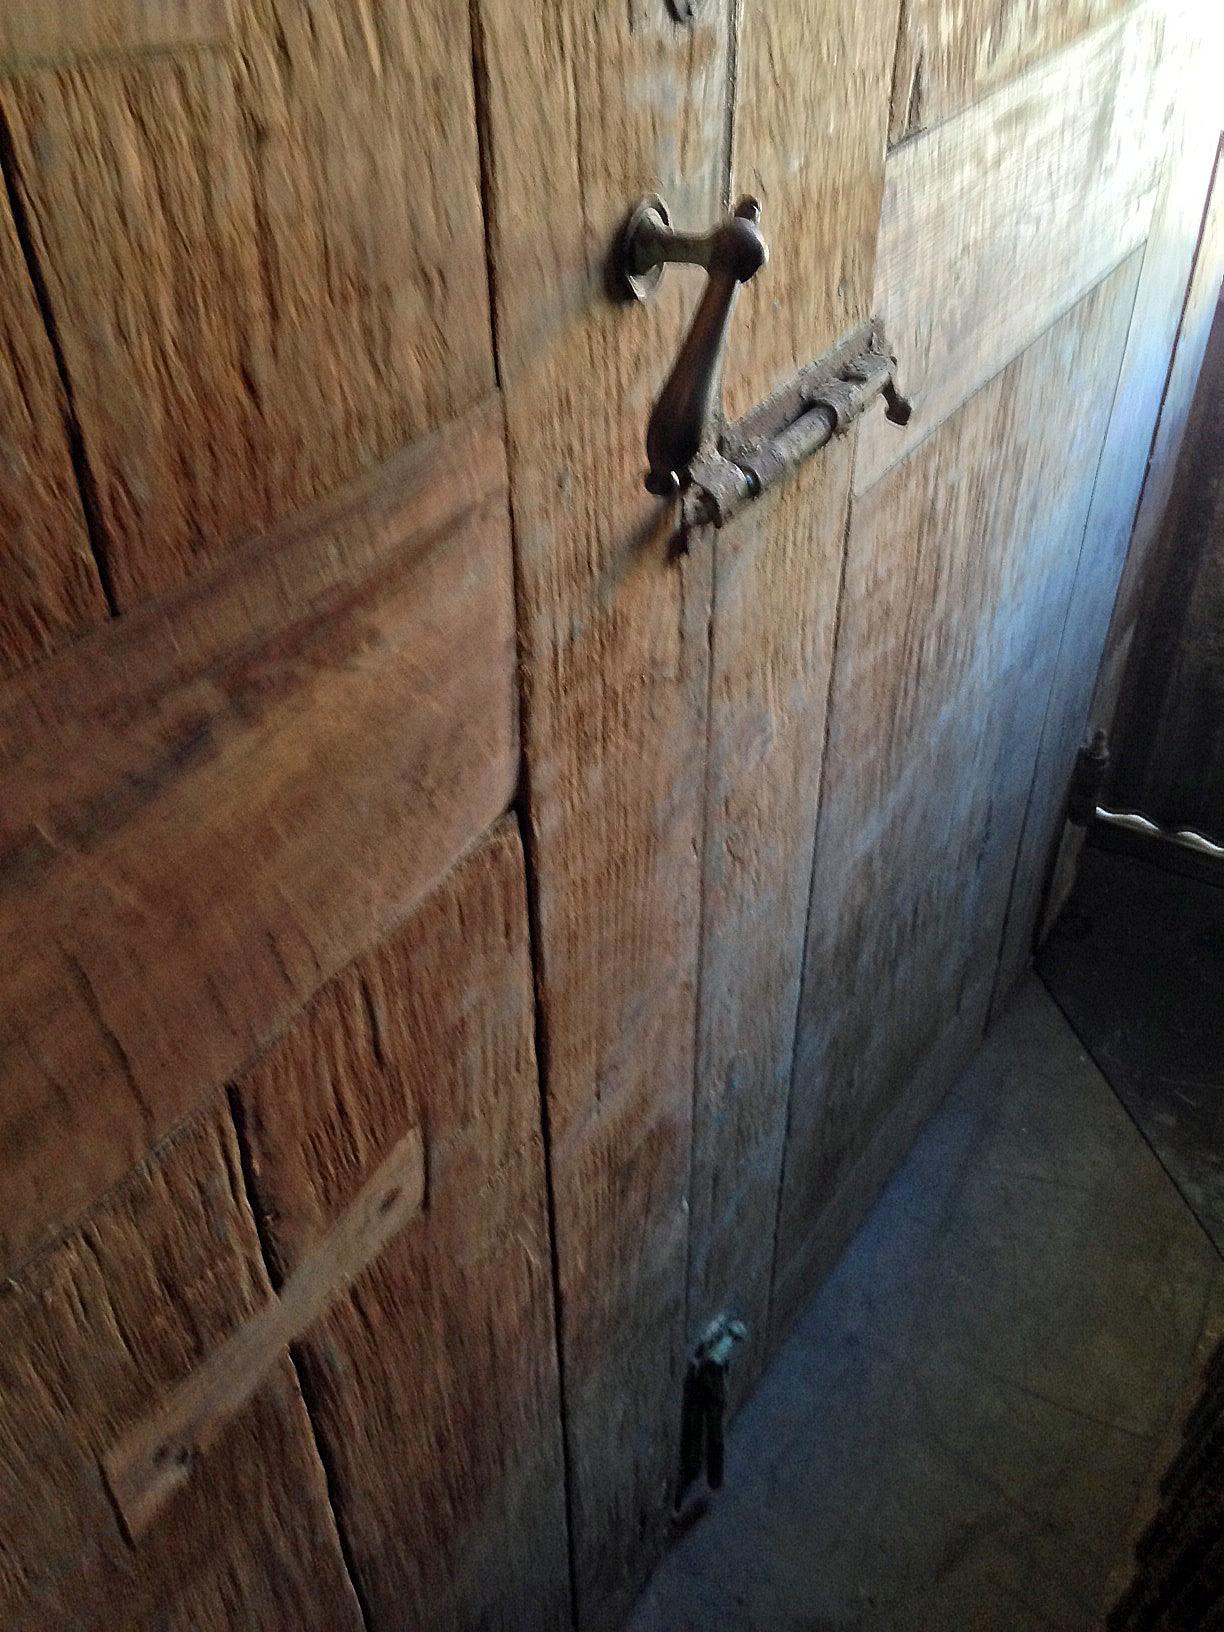 Salvaged Teak Door from Madura Island, Extra Large, Arched Top - Impact Imports